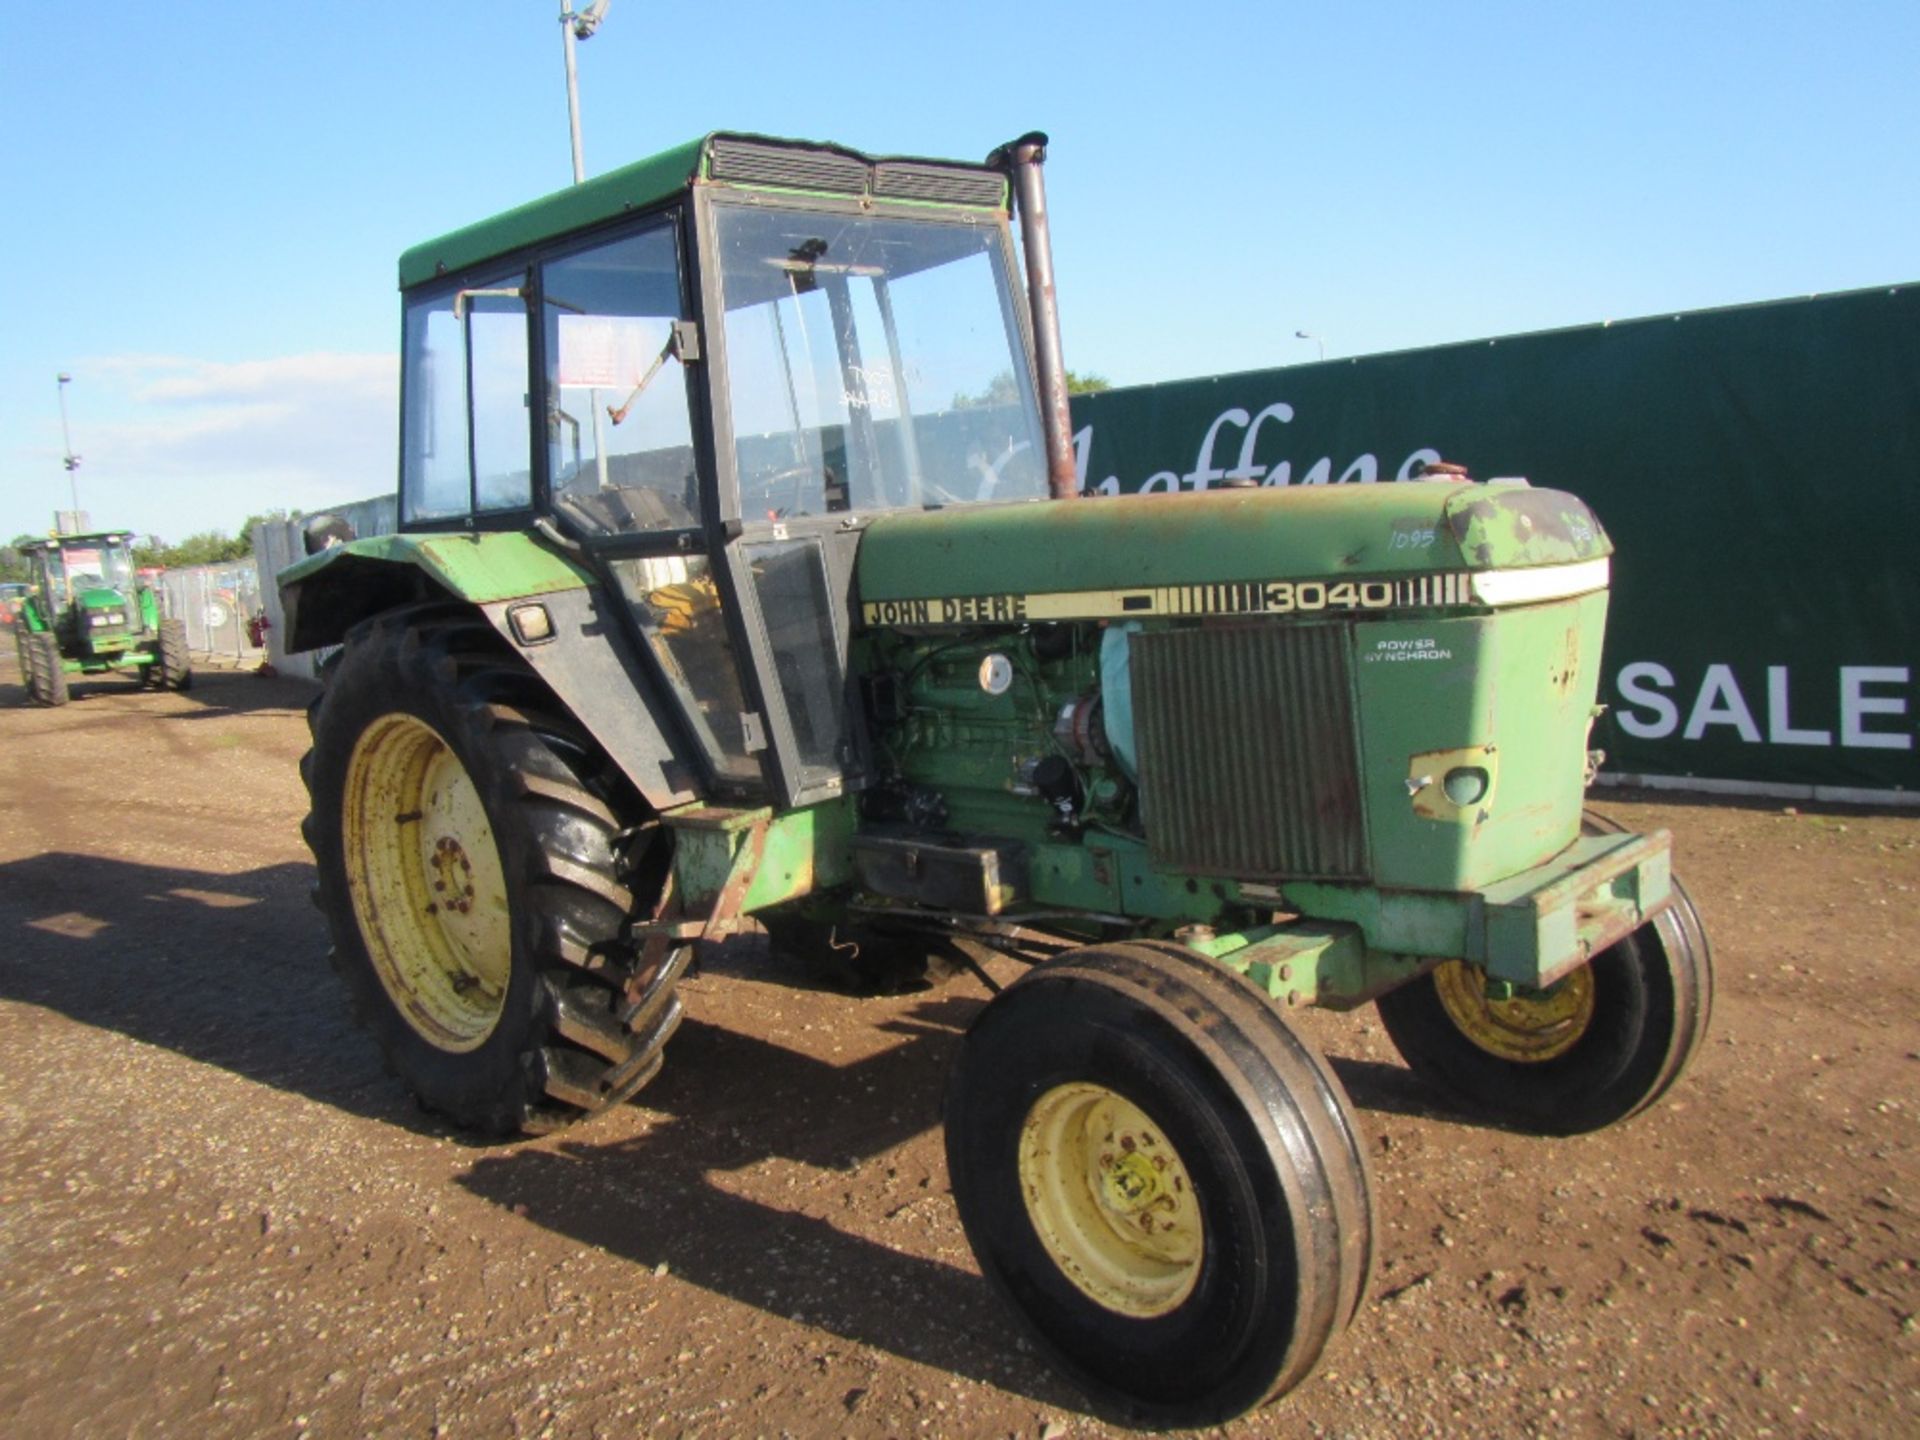 John Deere 3040 2wd Tractor with OPU Cab Reg. No. TFM 461V Ser No 364600 UNRESERVED LOT - Image 3 of 16